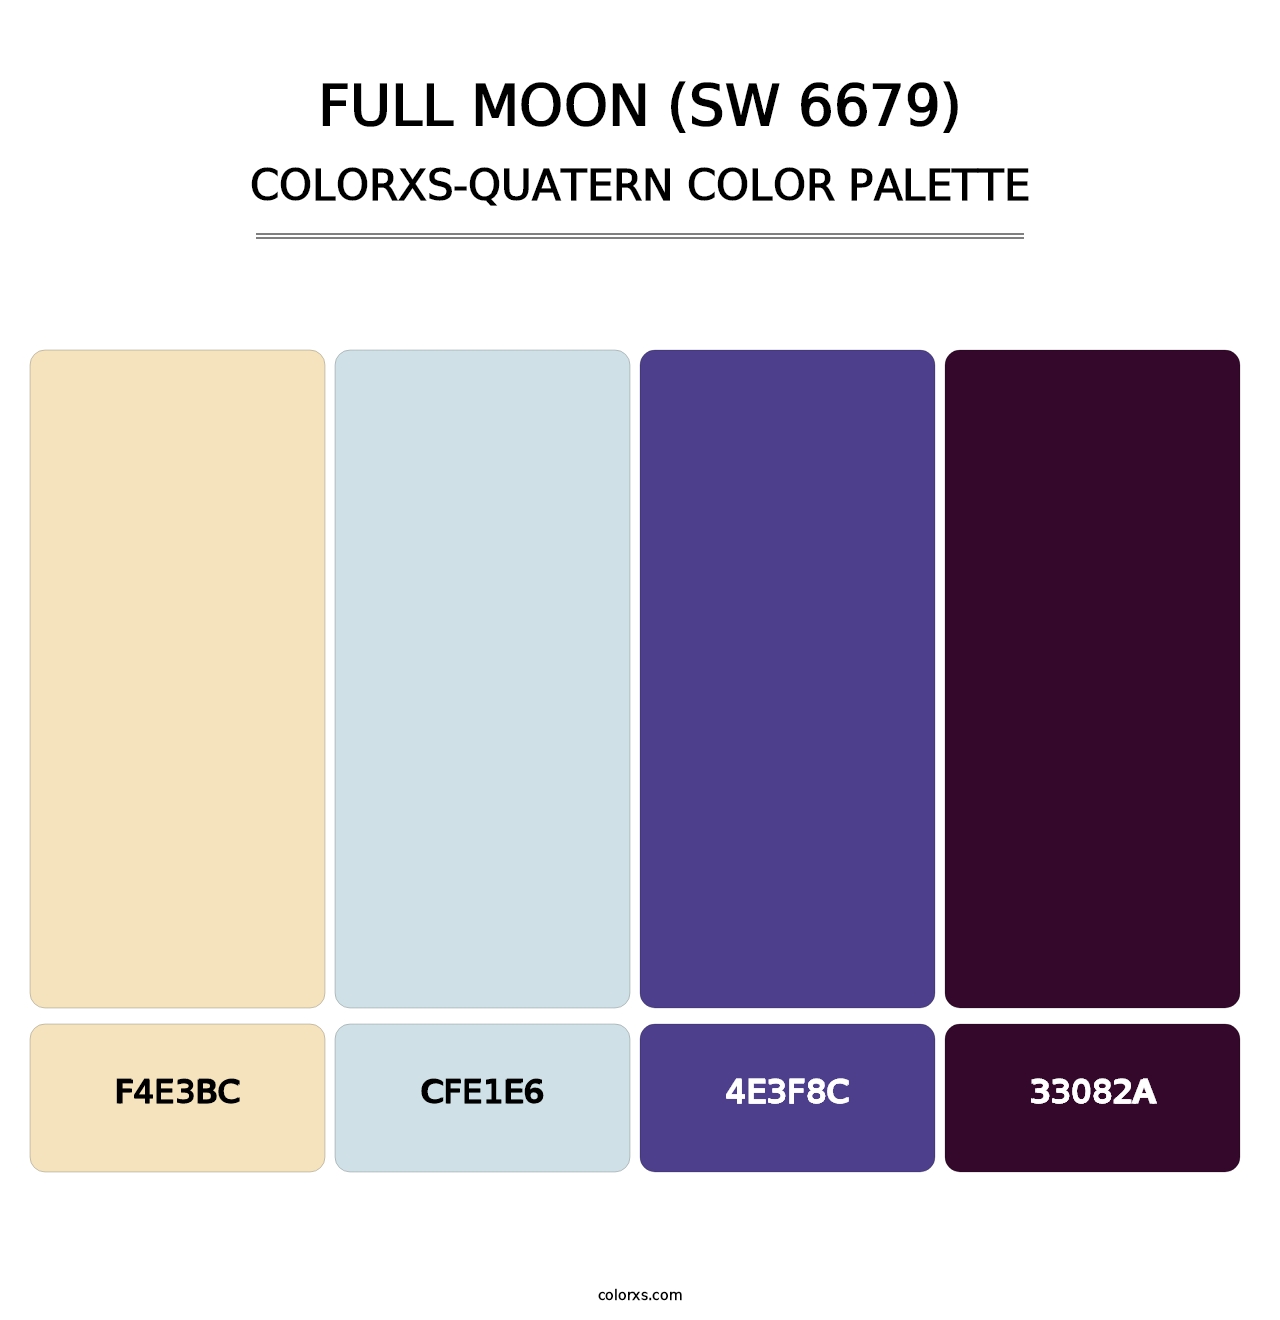 Full Moon (SW 6679) - Colorxs Quatern Palette